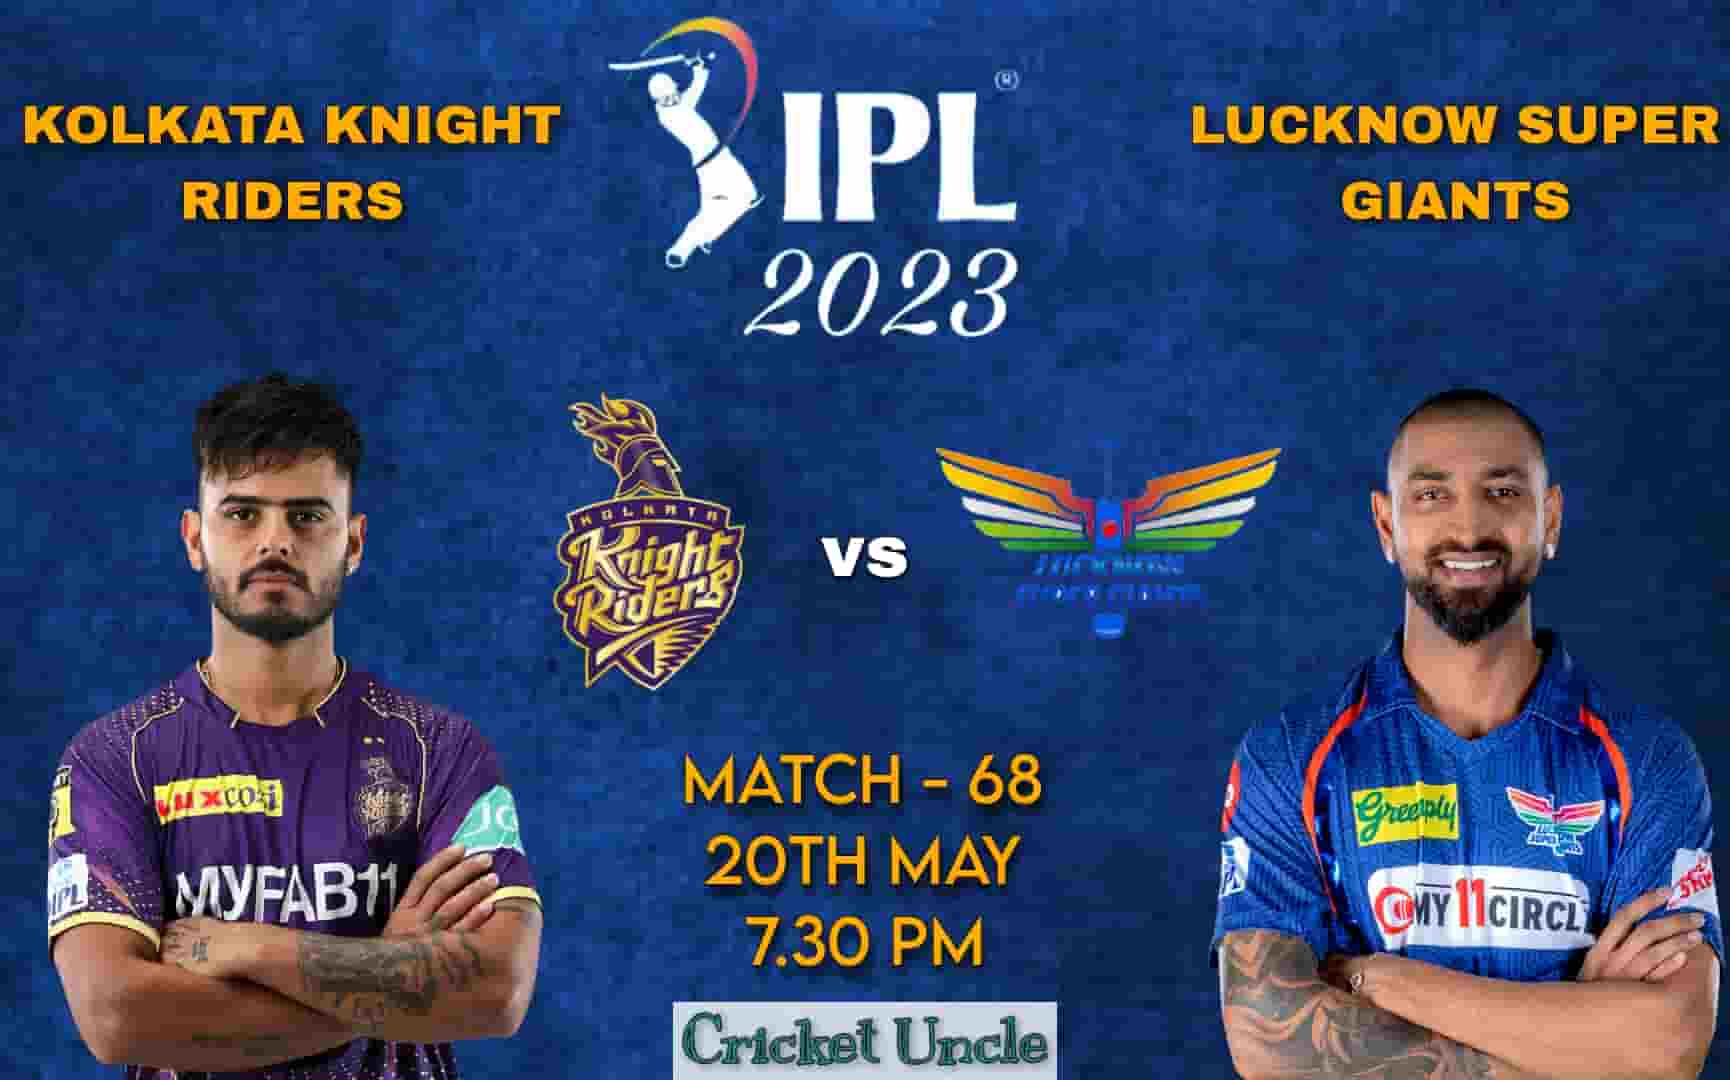 Poster of IPL 2023 match 68 prediction for Kolkata Knight Riders vs Lucknow Super Giants